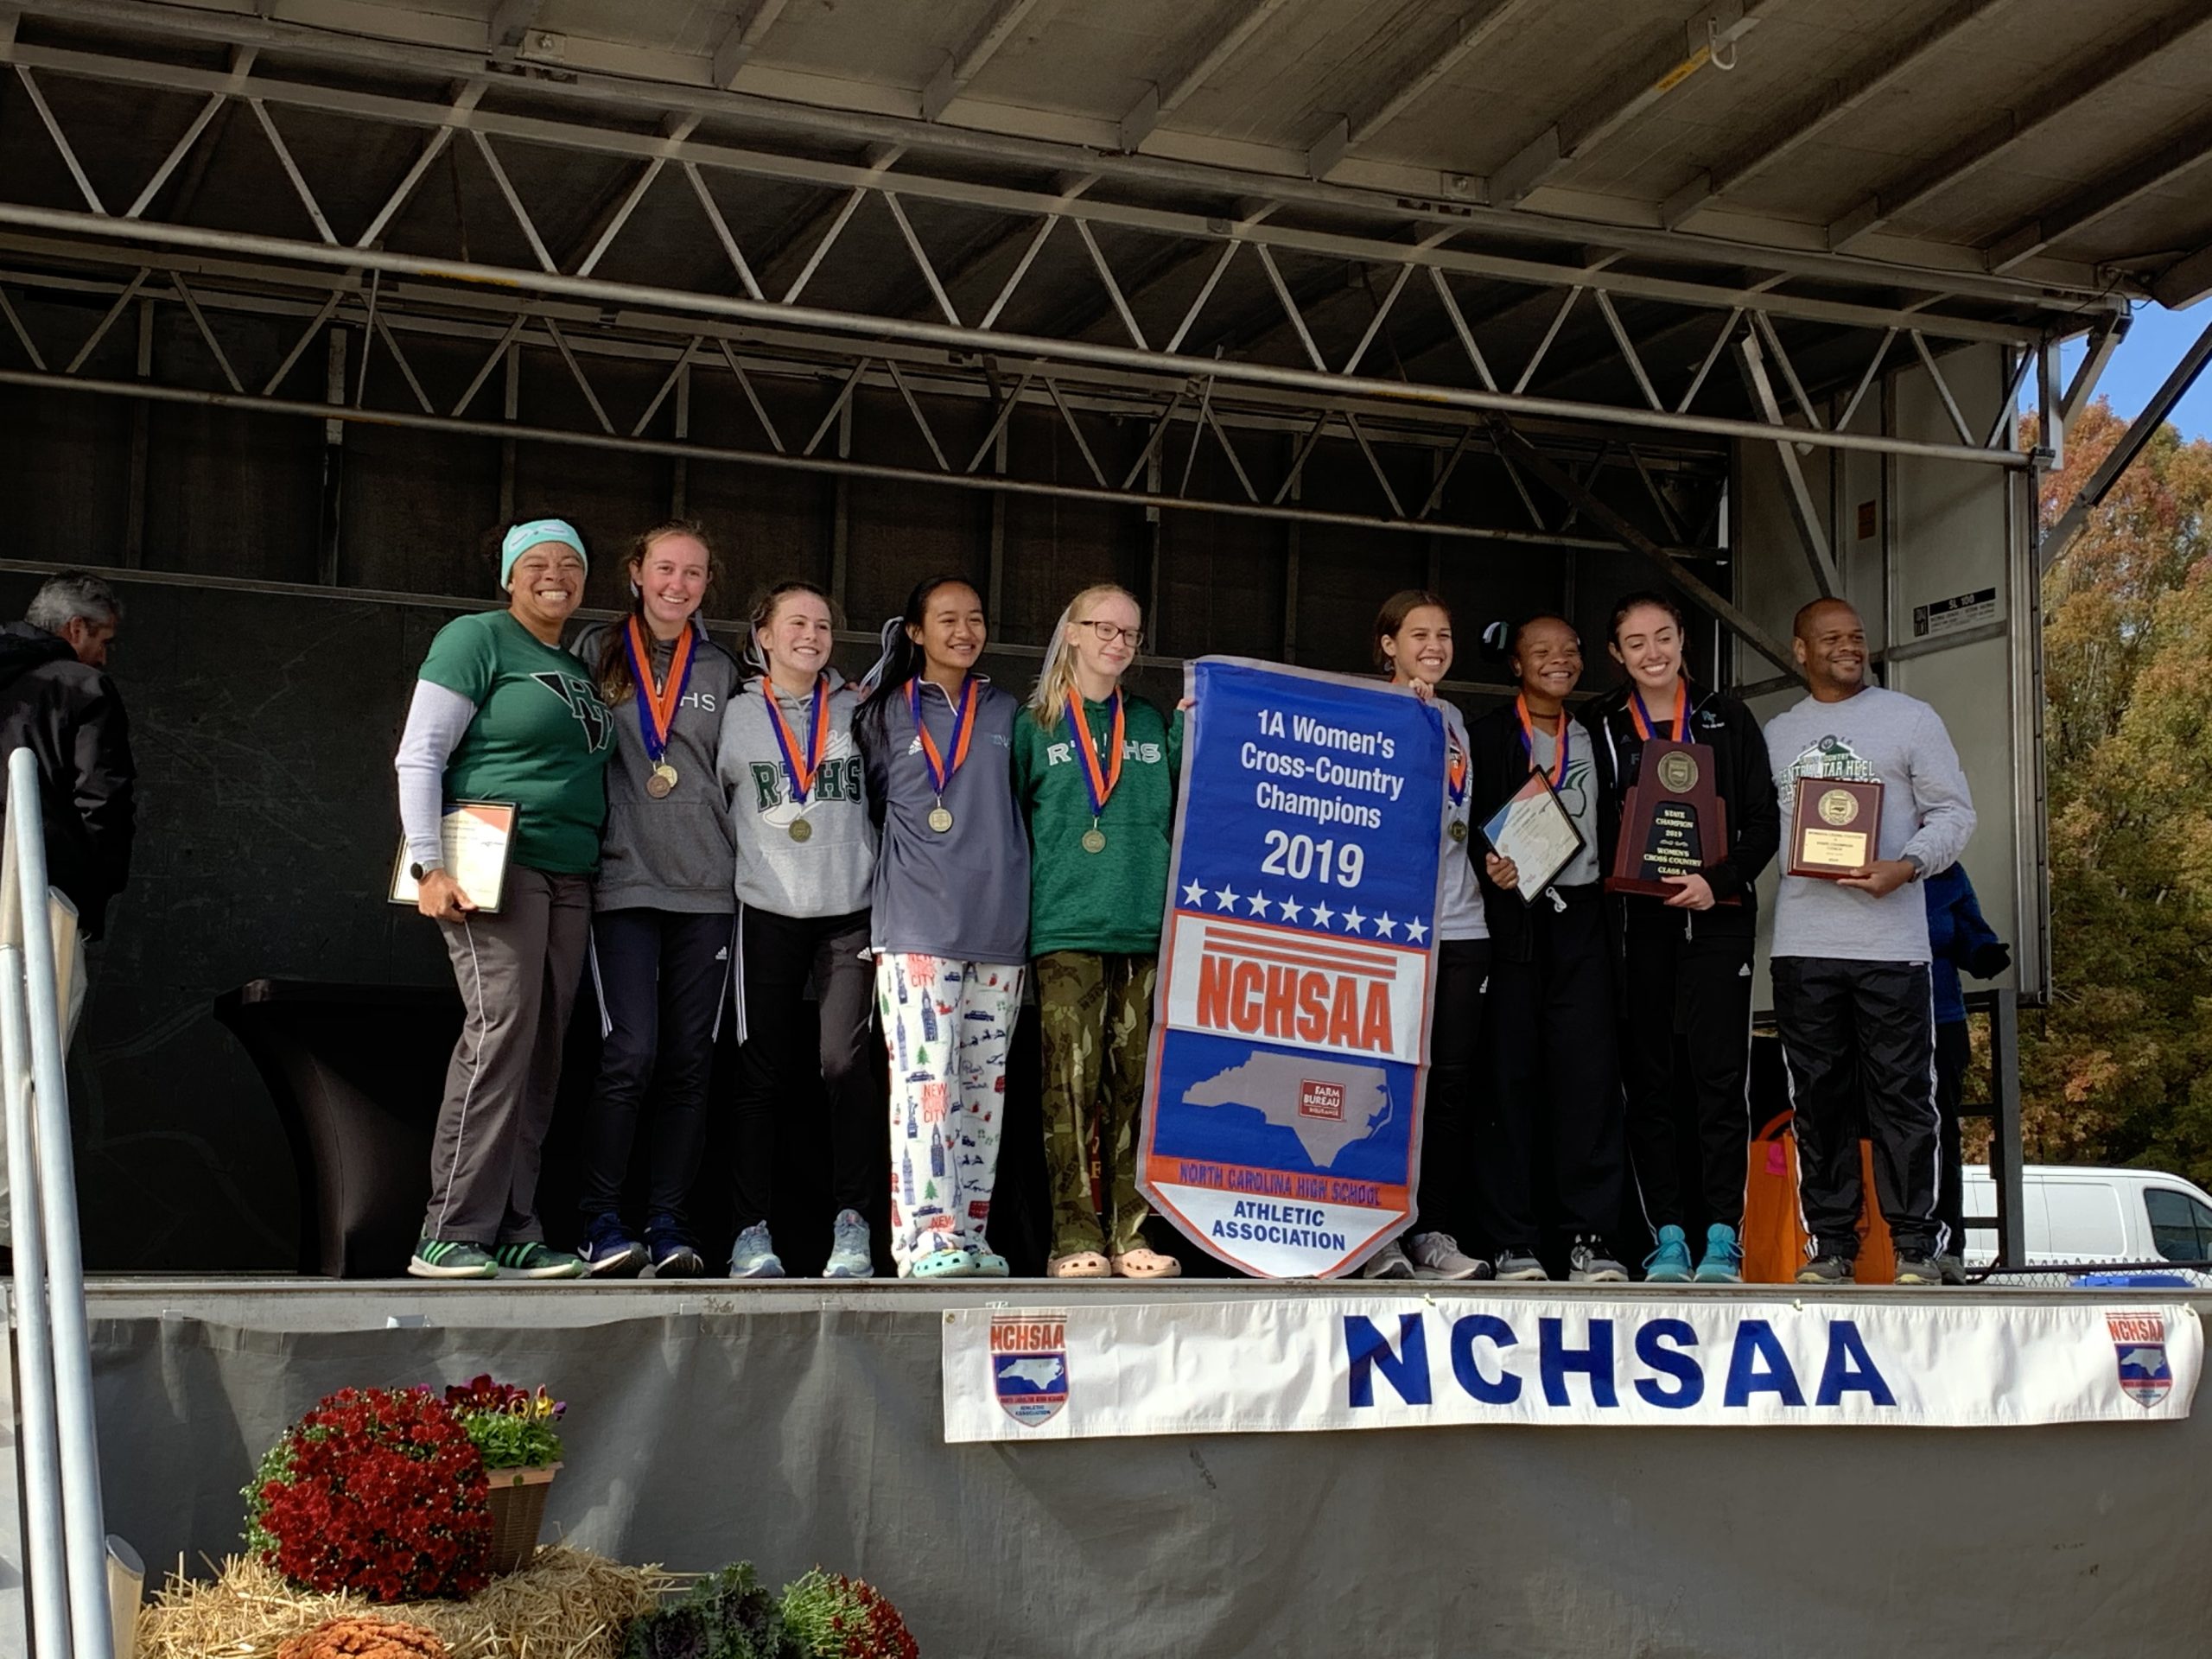 Research Triangle 2019 1A Women's Cross Country State Champions